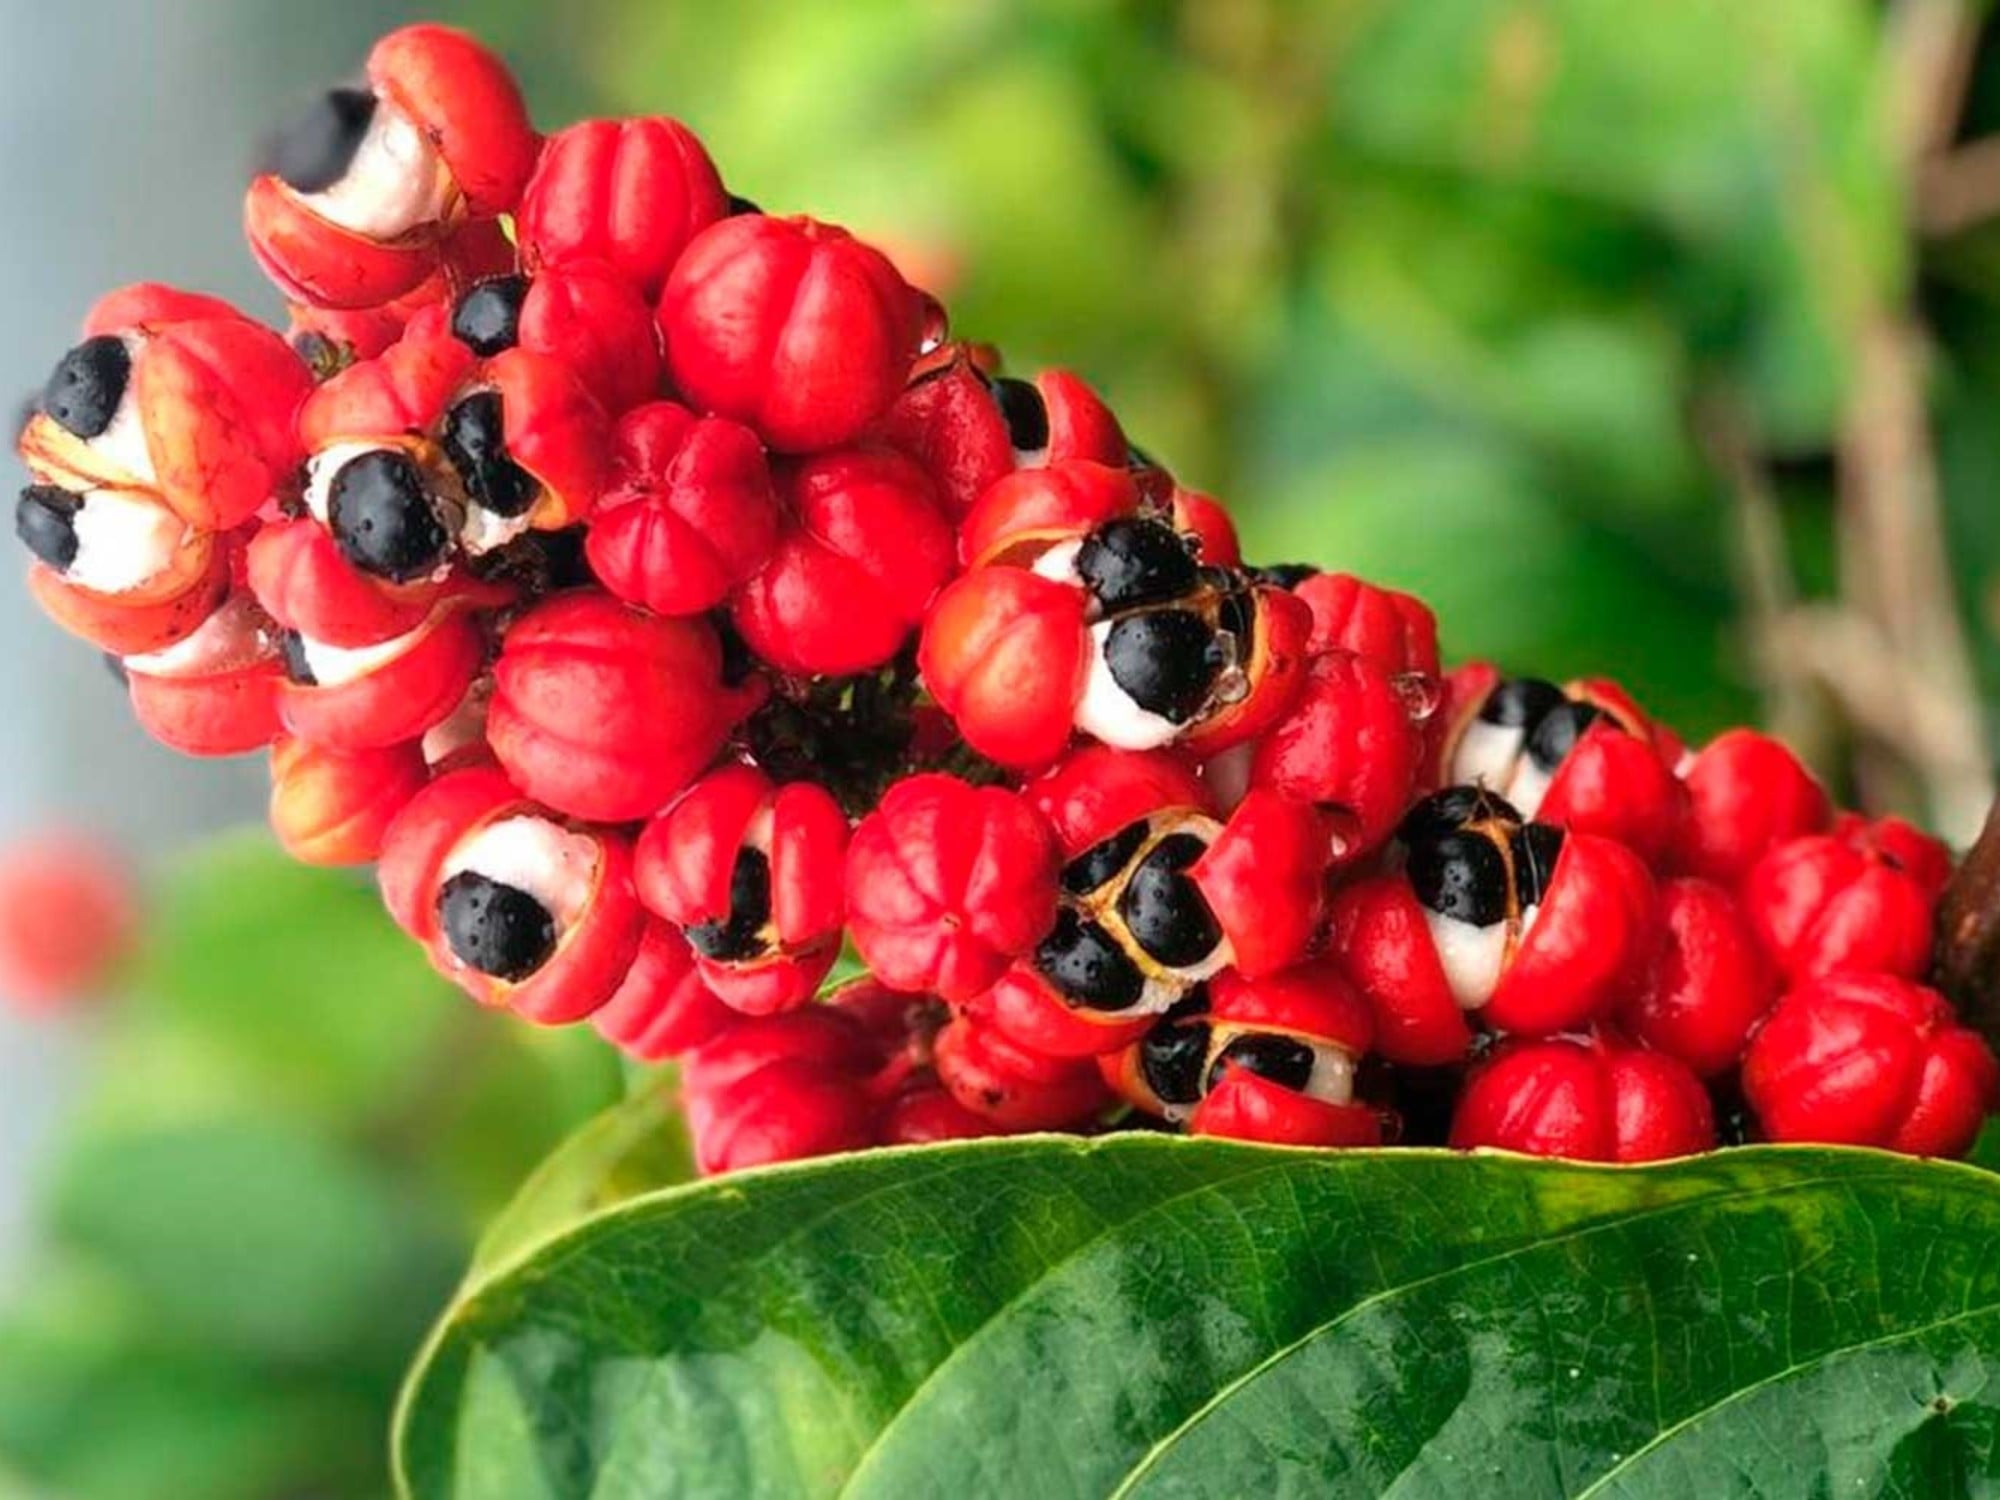 Close-up of vibrant red guarana fruits with black seeds growing on a plant with green leaves.